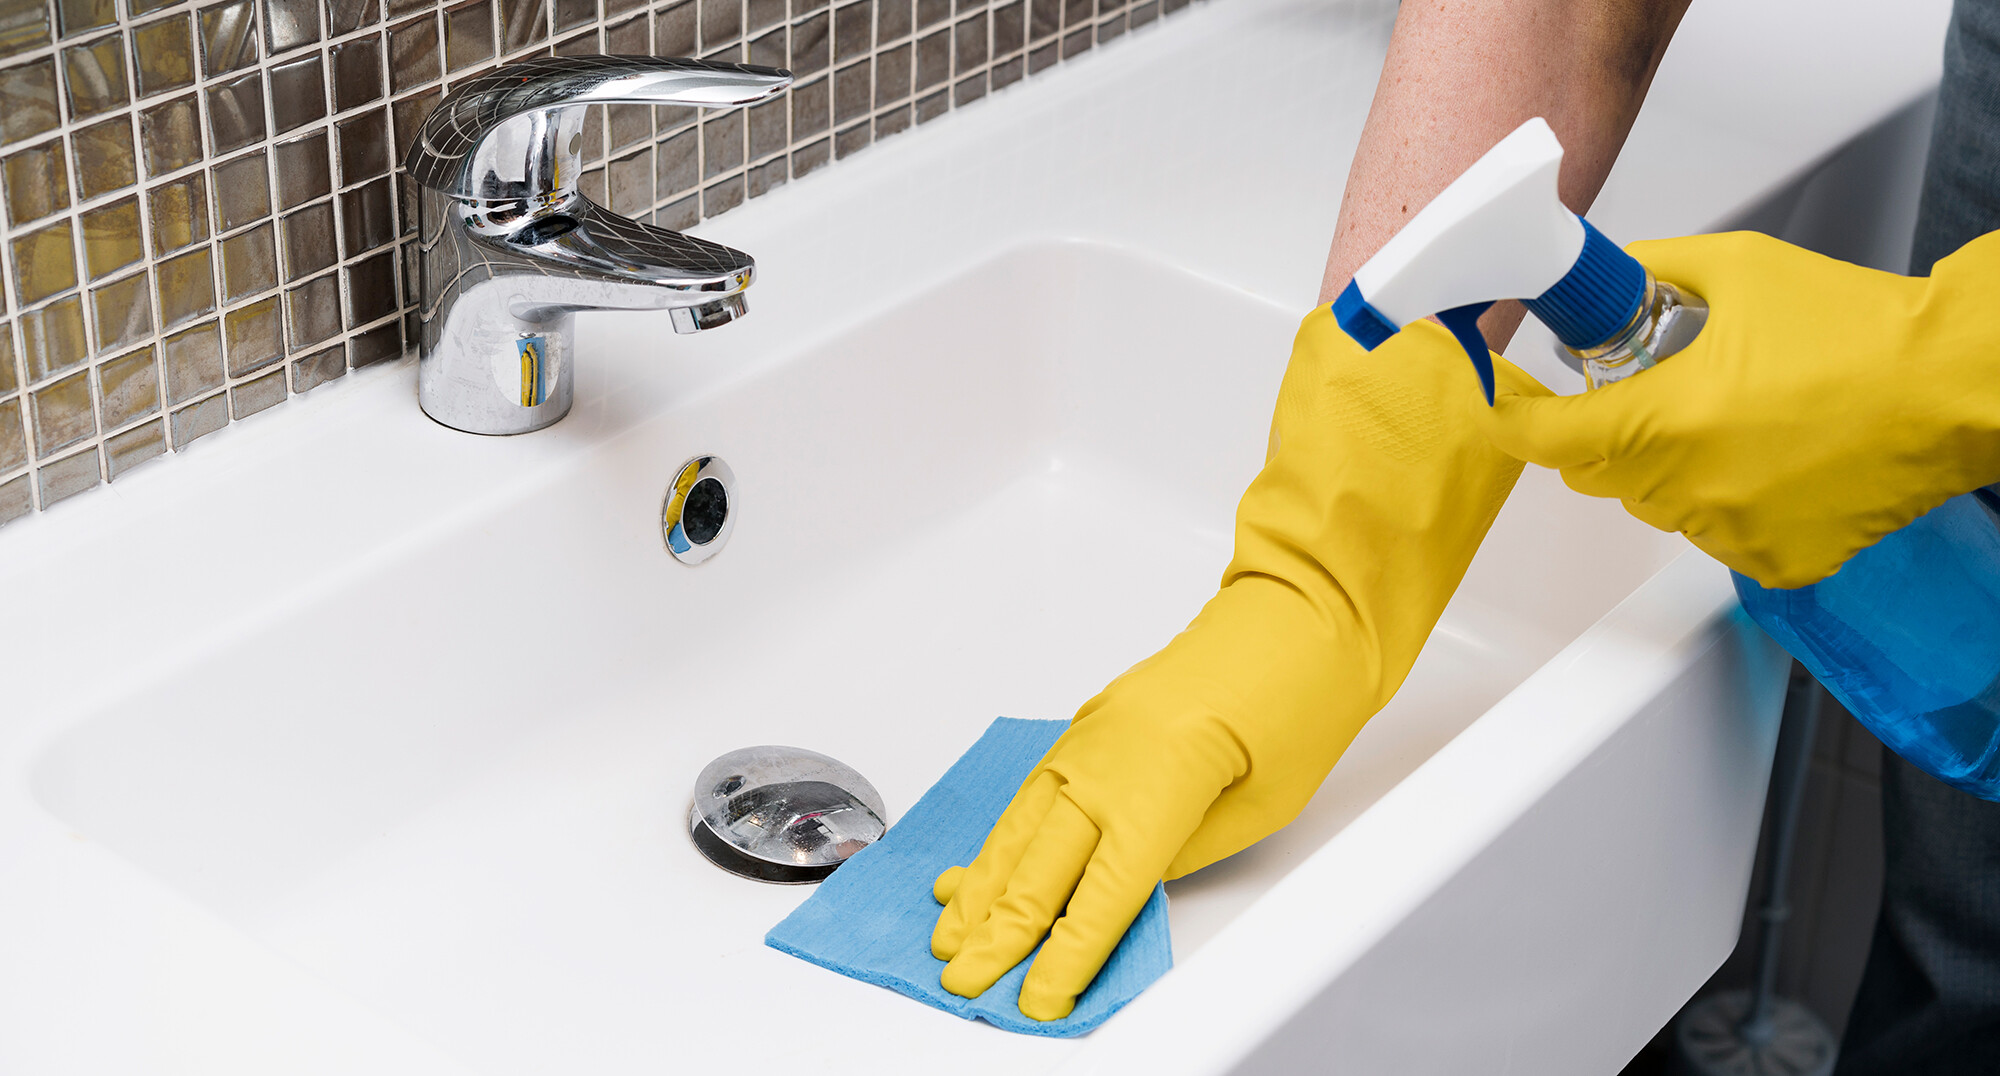 Professional house cleaning tips